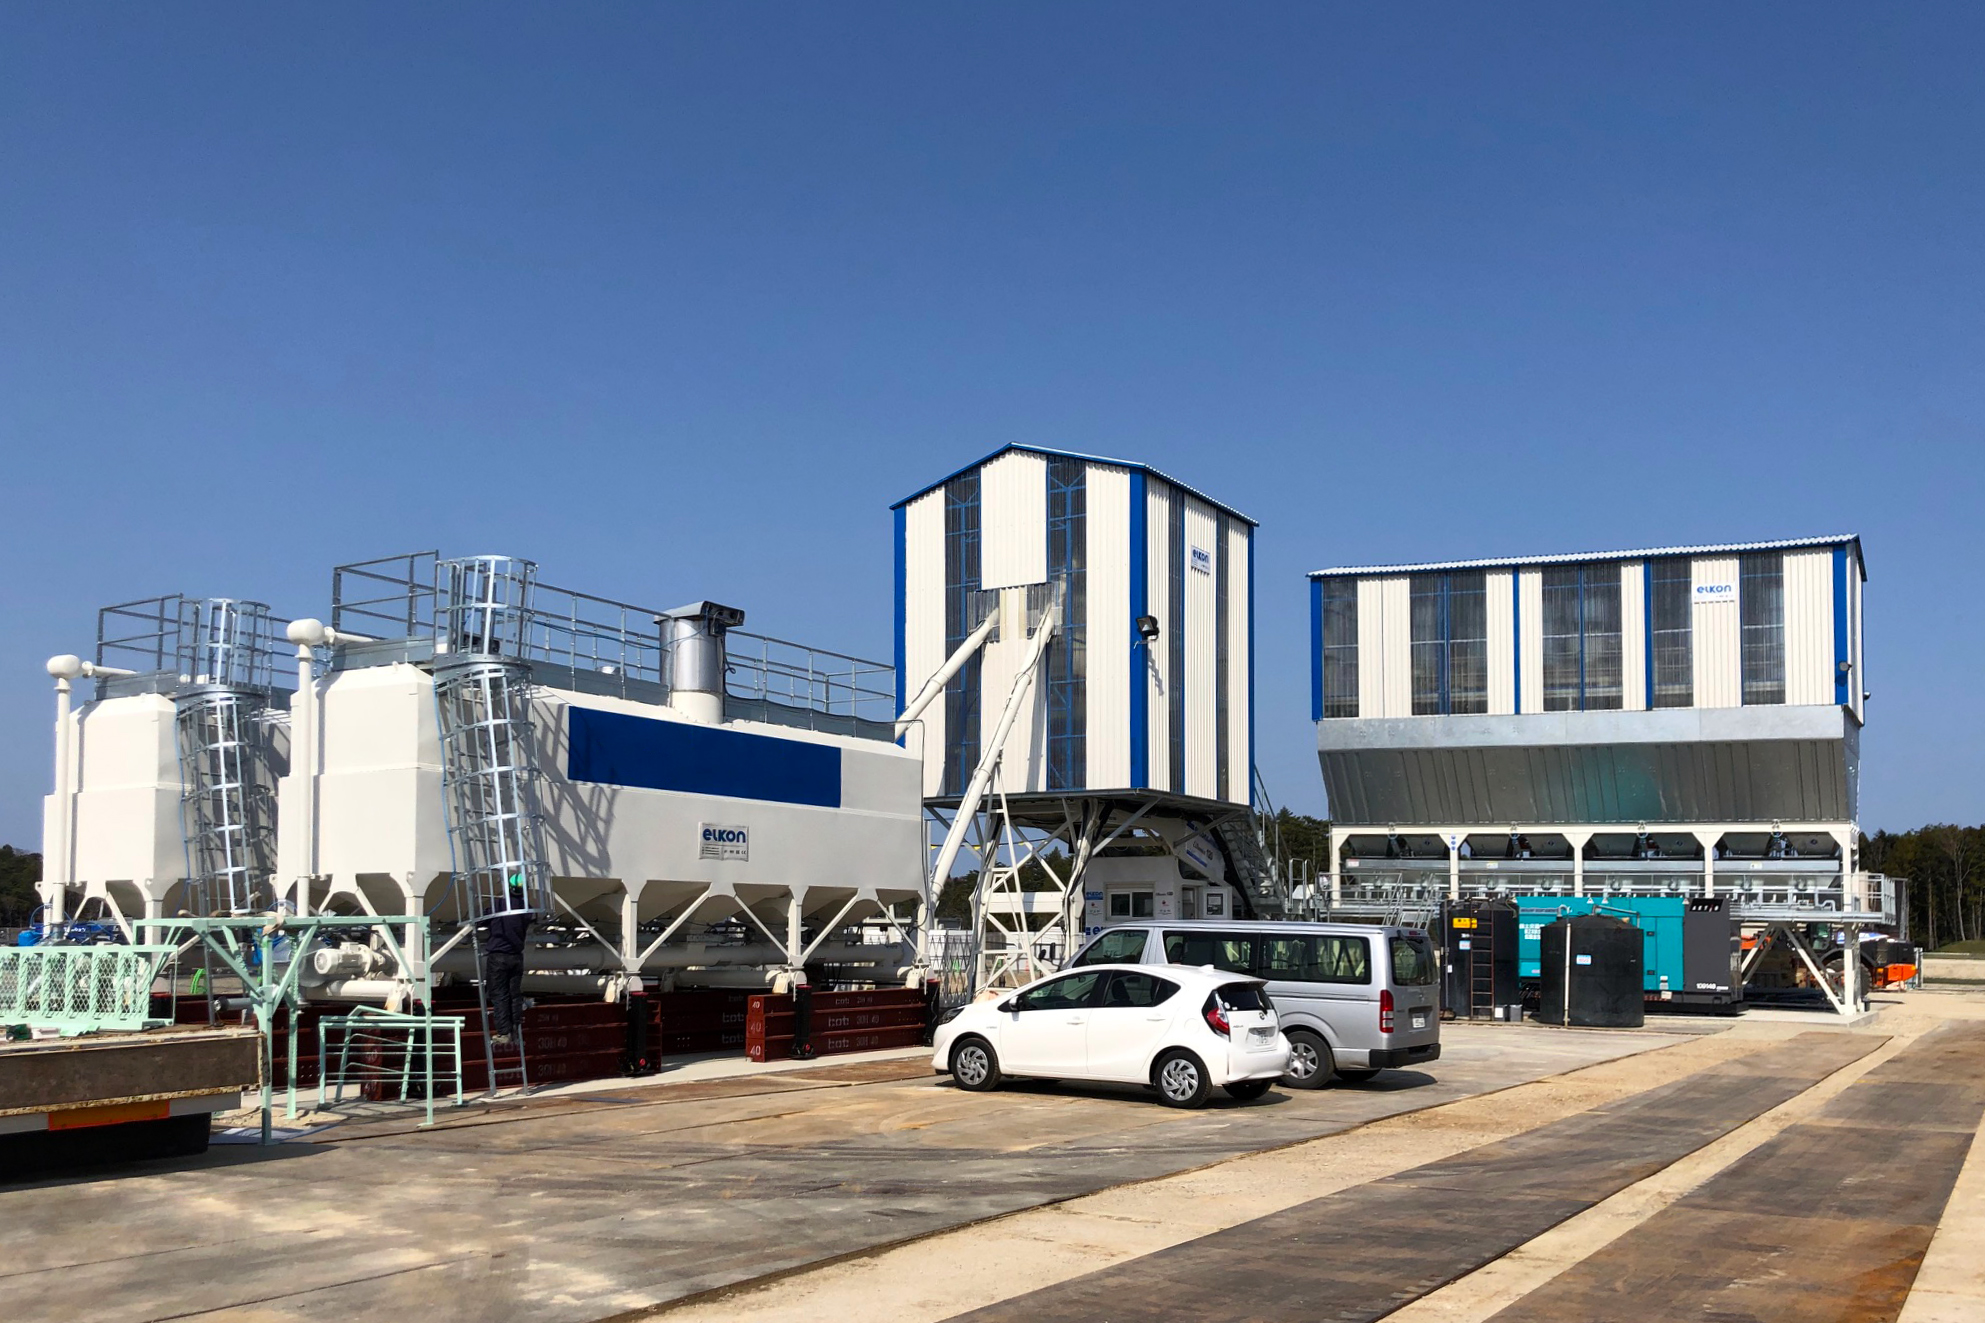 ELKON concrete plants arrive in Japan, the country of technology